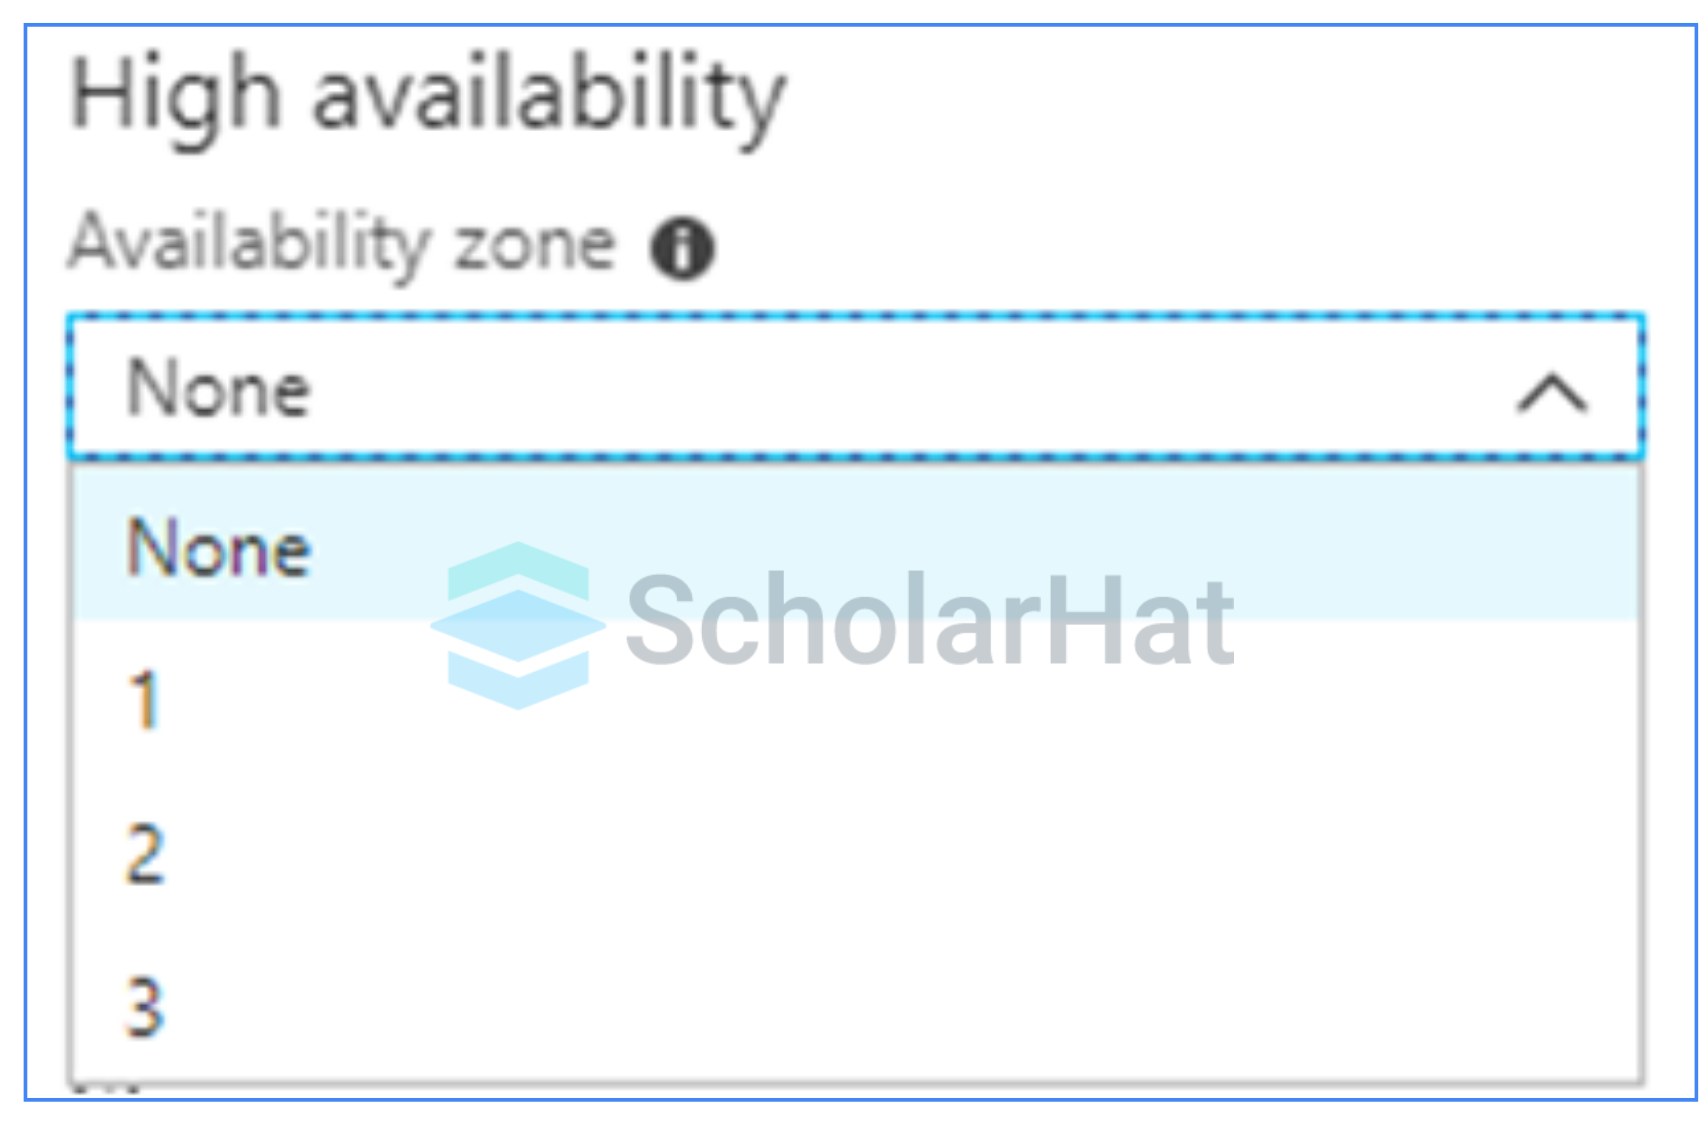 How to configure an Availability Zone?